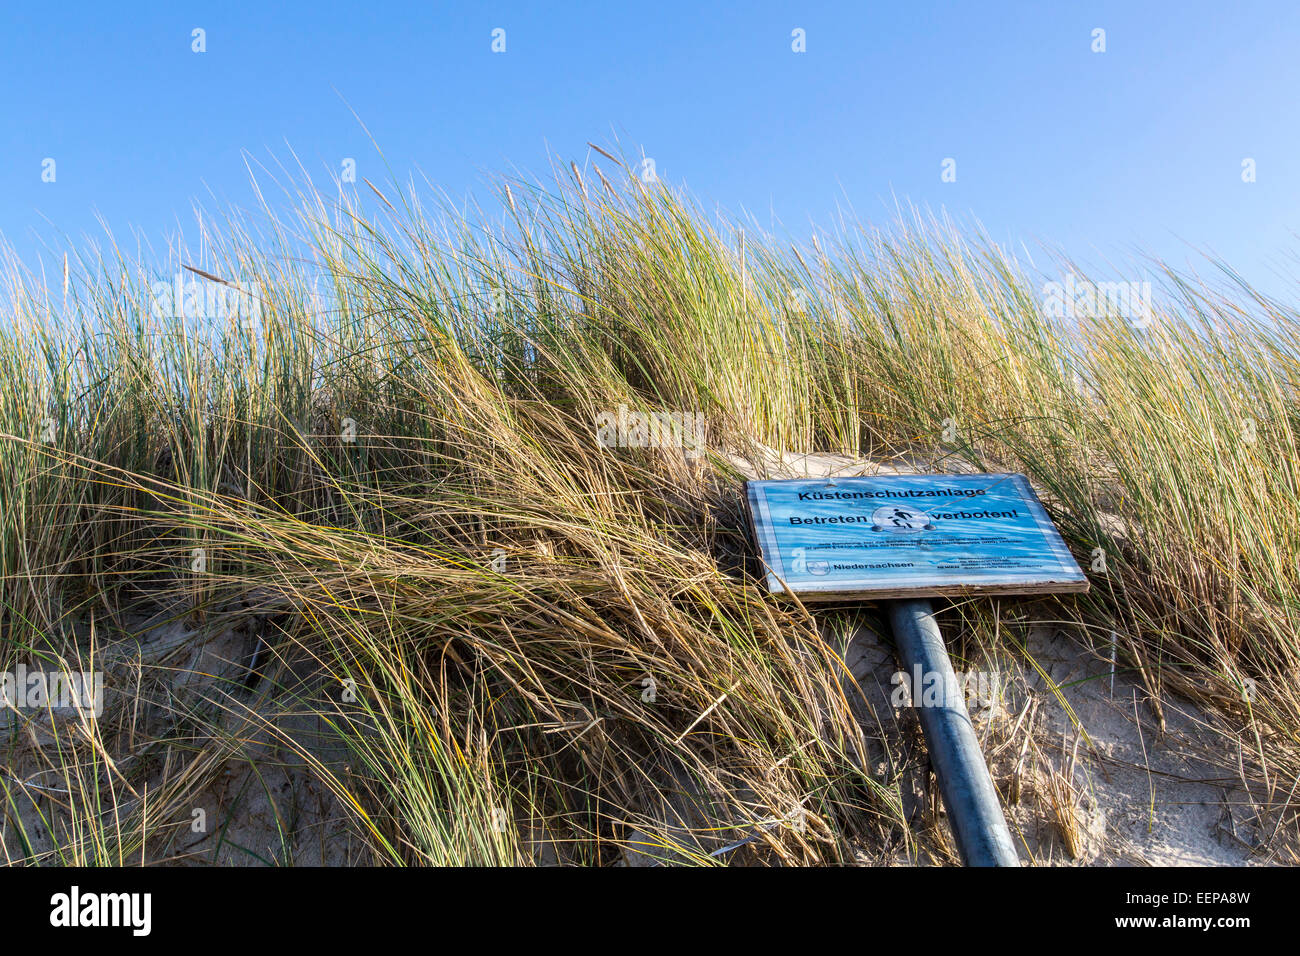 Coastal protection project on the west shore of North sea island Spiekeroog, Germany, to protect the dunes and beach from waves Stock Photo